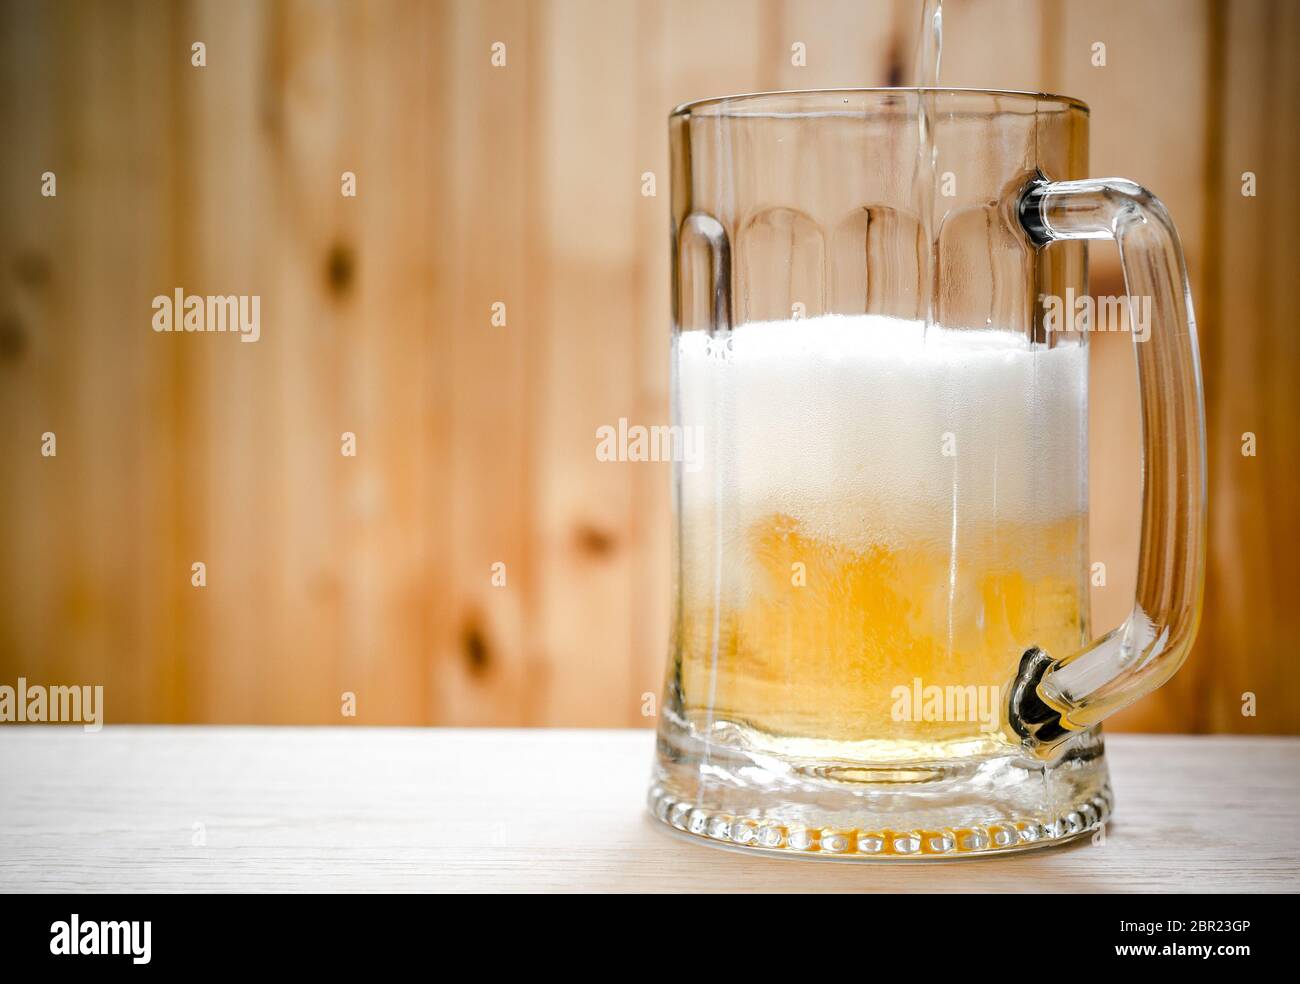 Beer mug on the wooden background Stock Photo